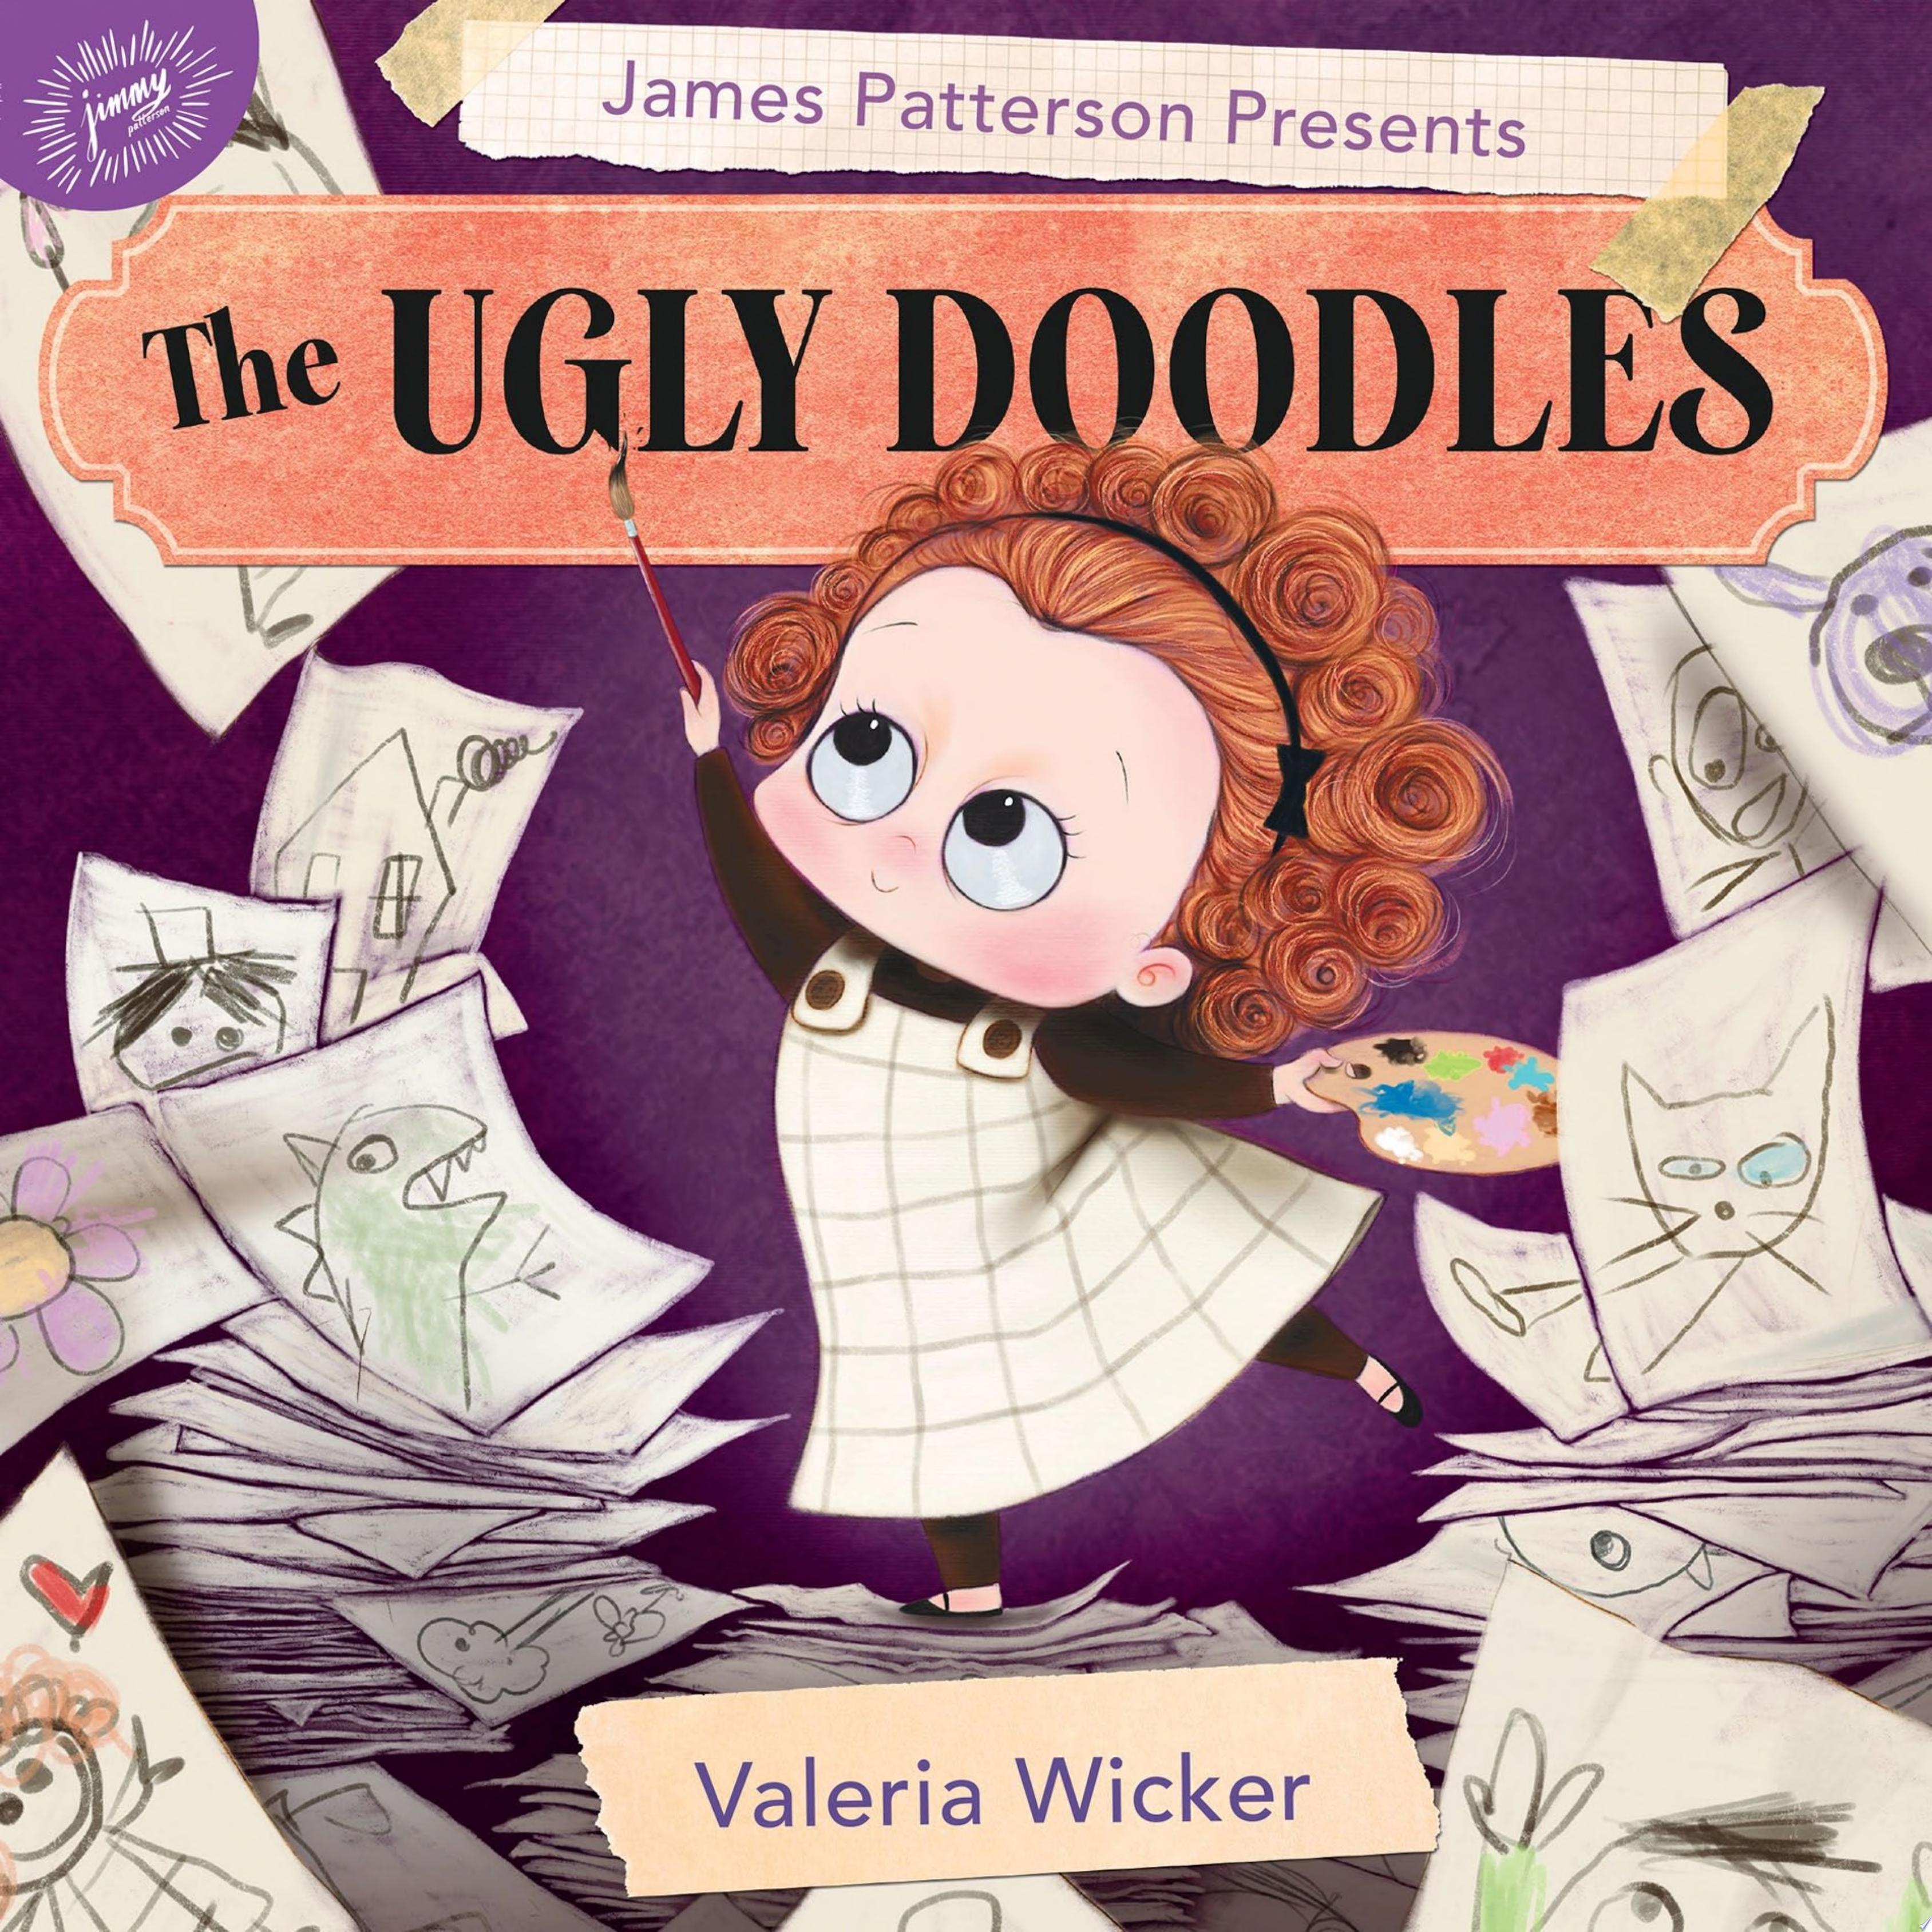 Image for "The Ugly Doodles"